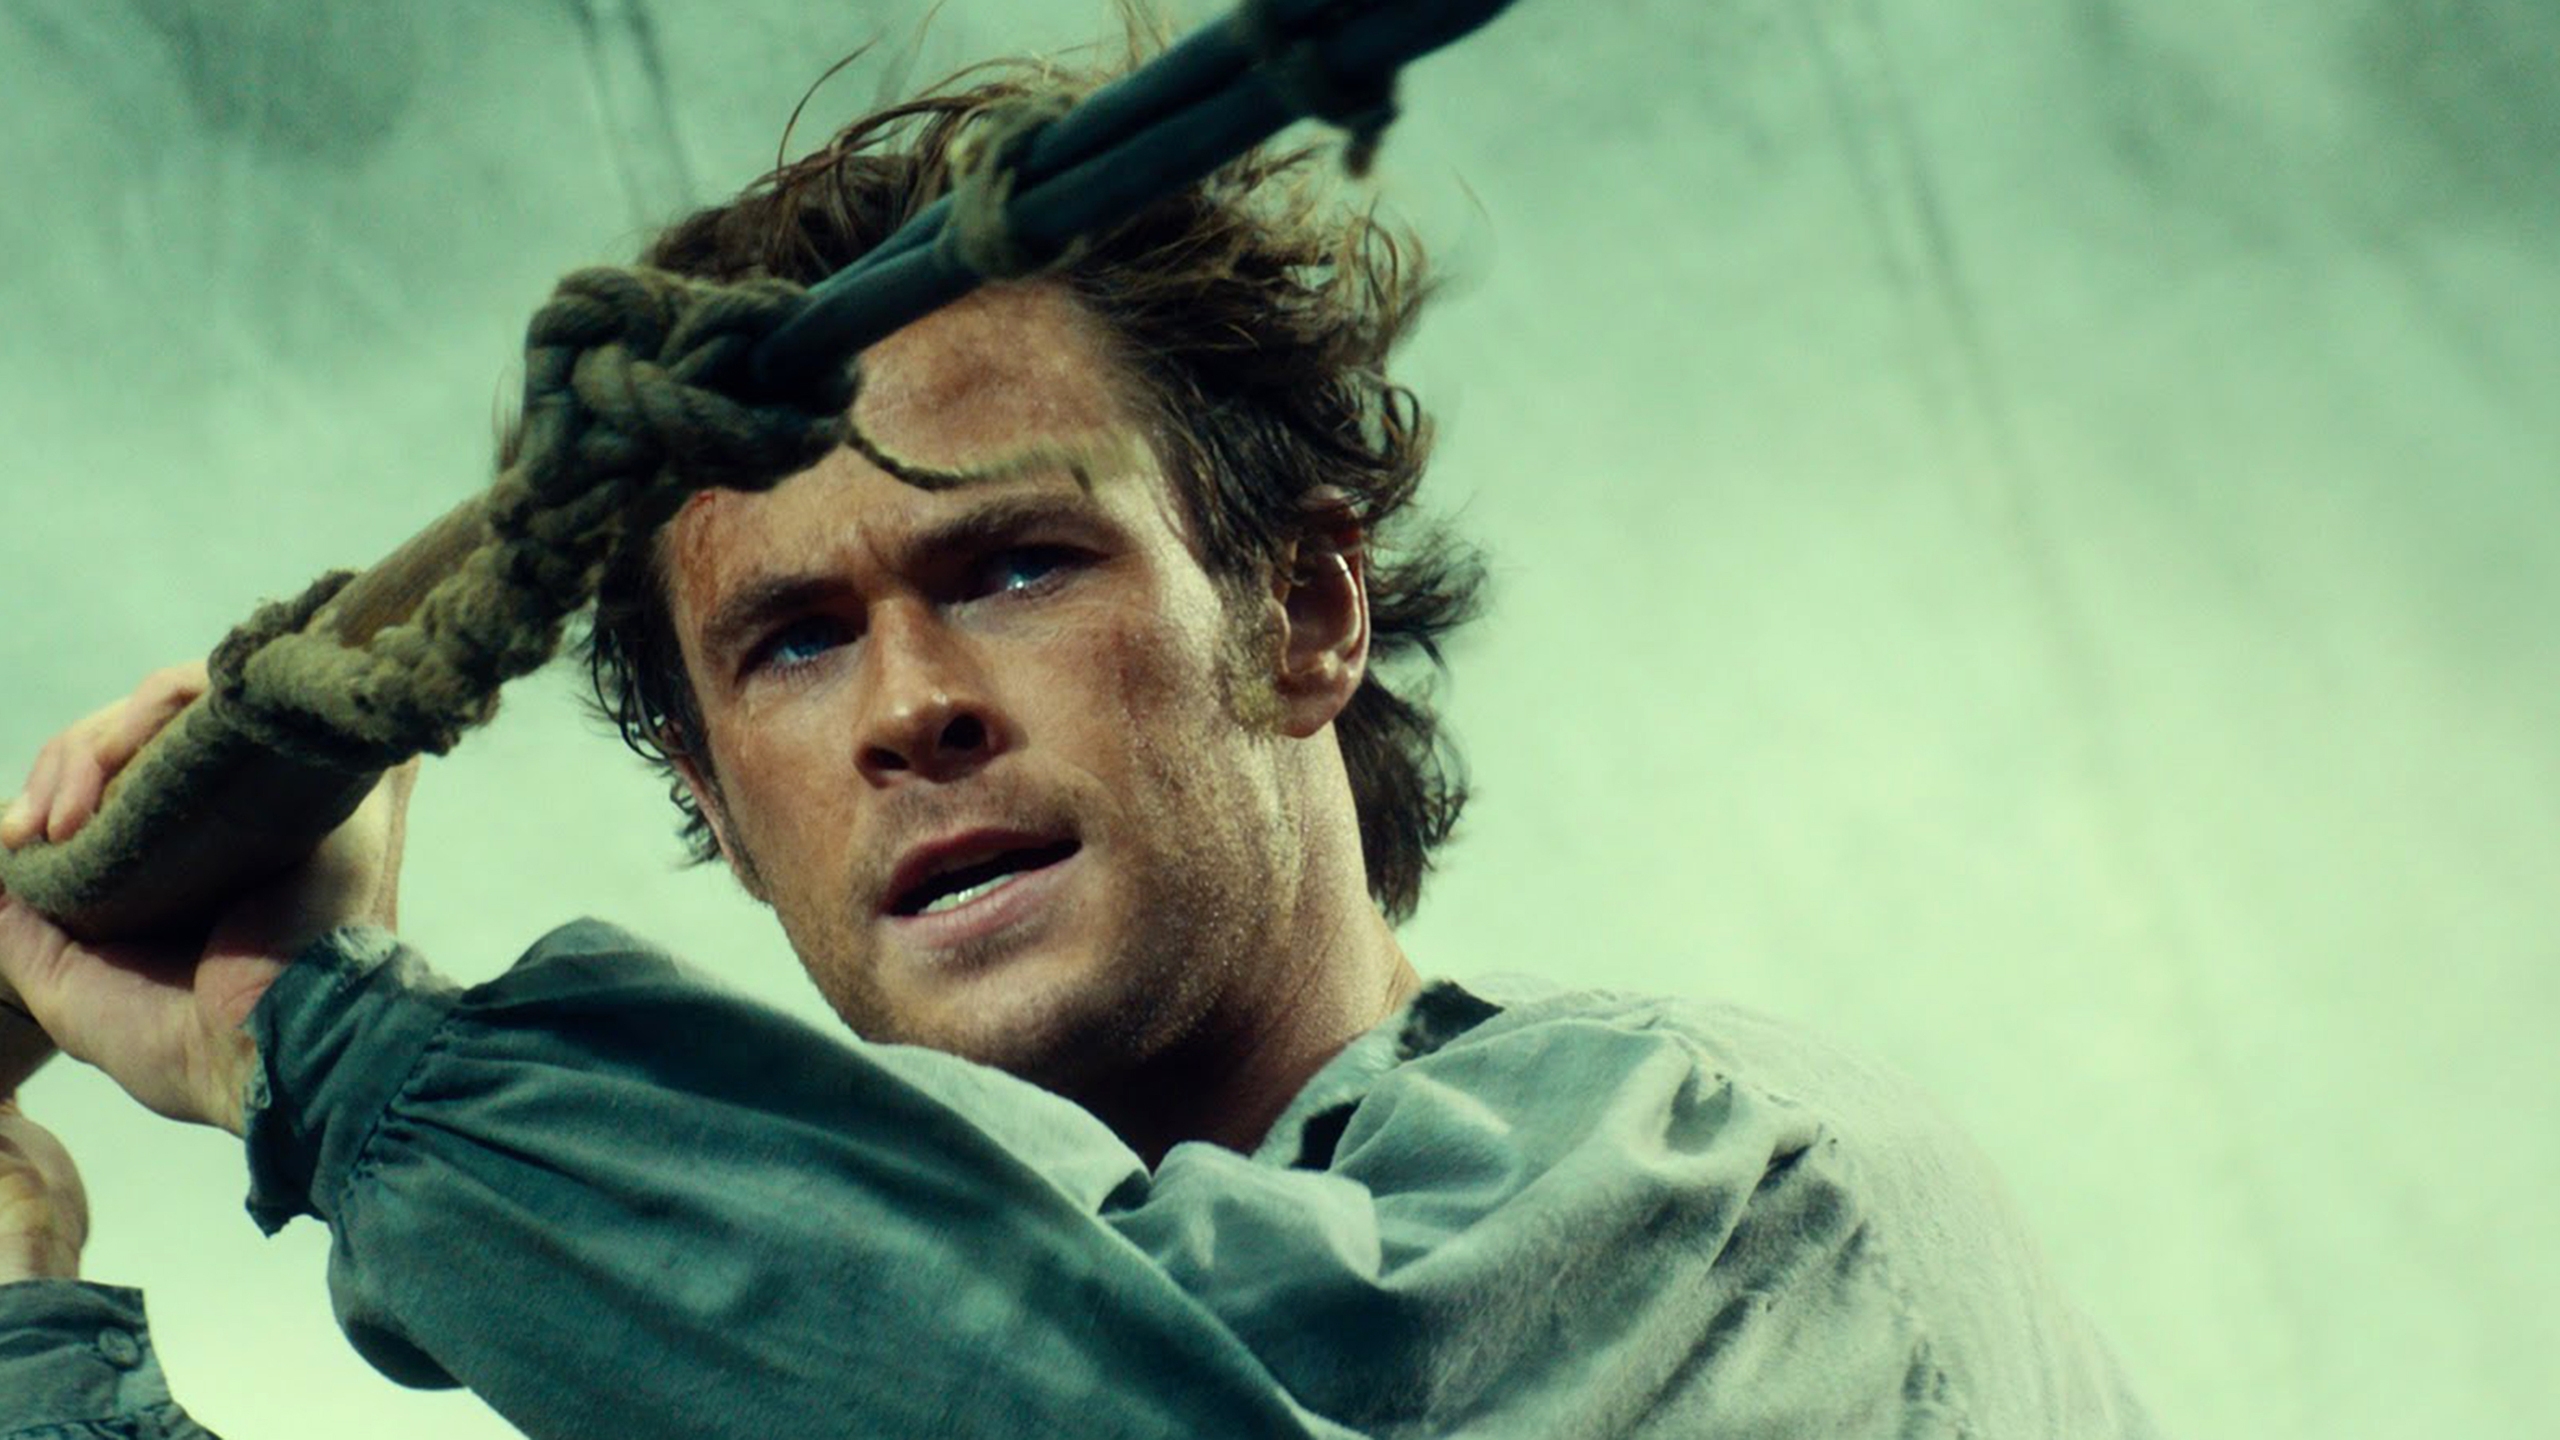 In The Heart of The Sea for 2560x1440 HDTV resolution